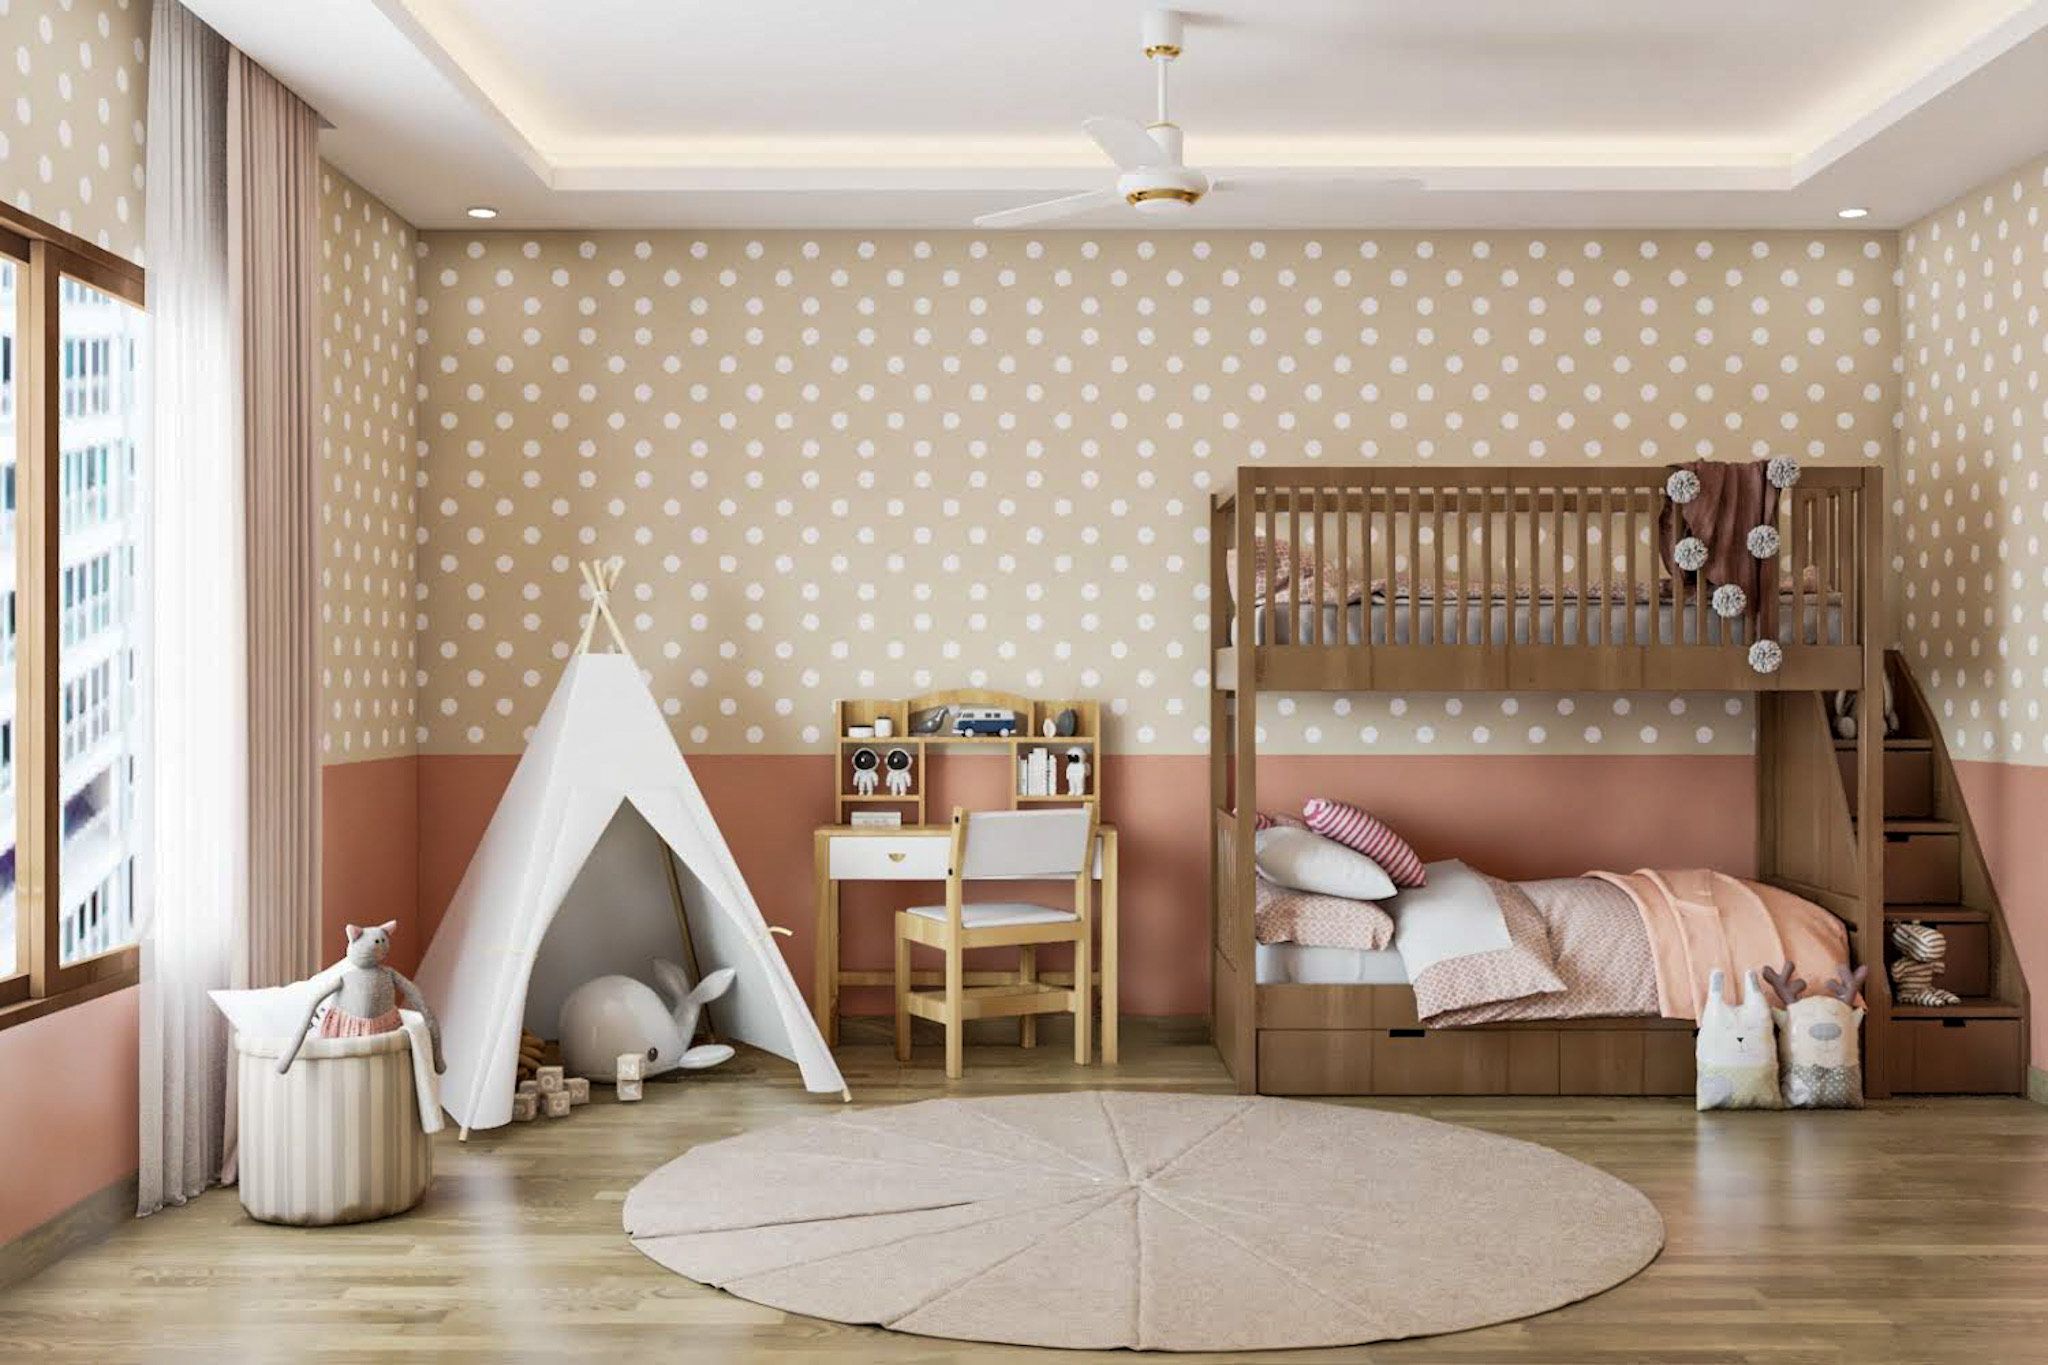 Contemporary Kids Room Design With A Wooden Bunk Bed